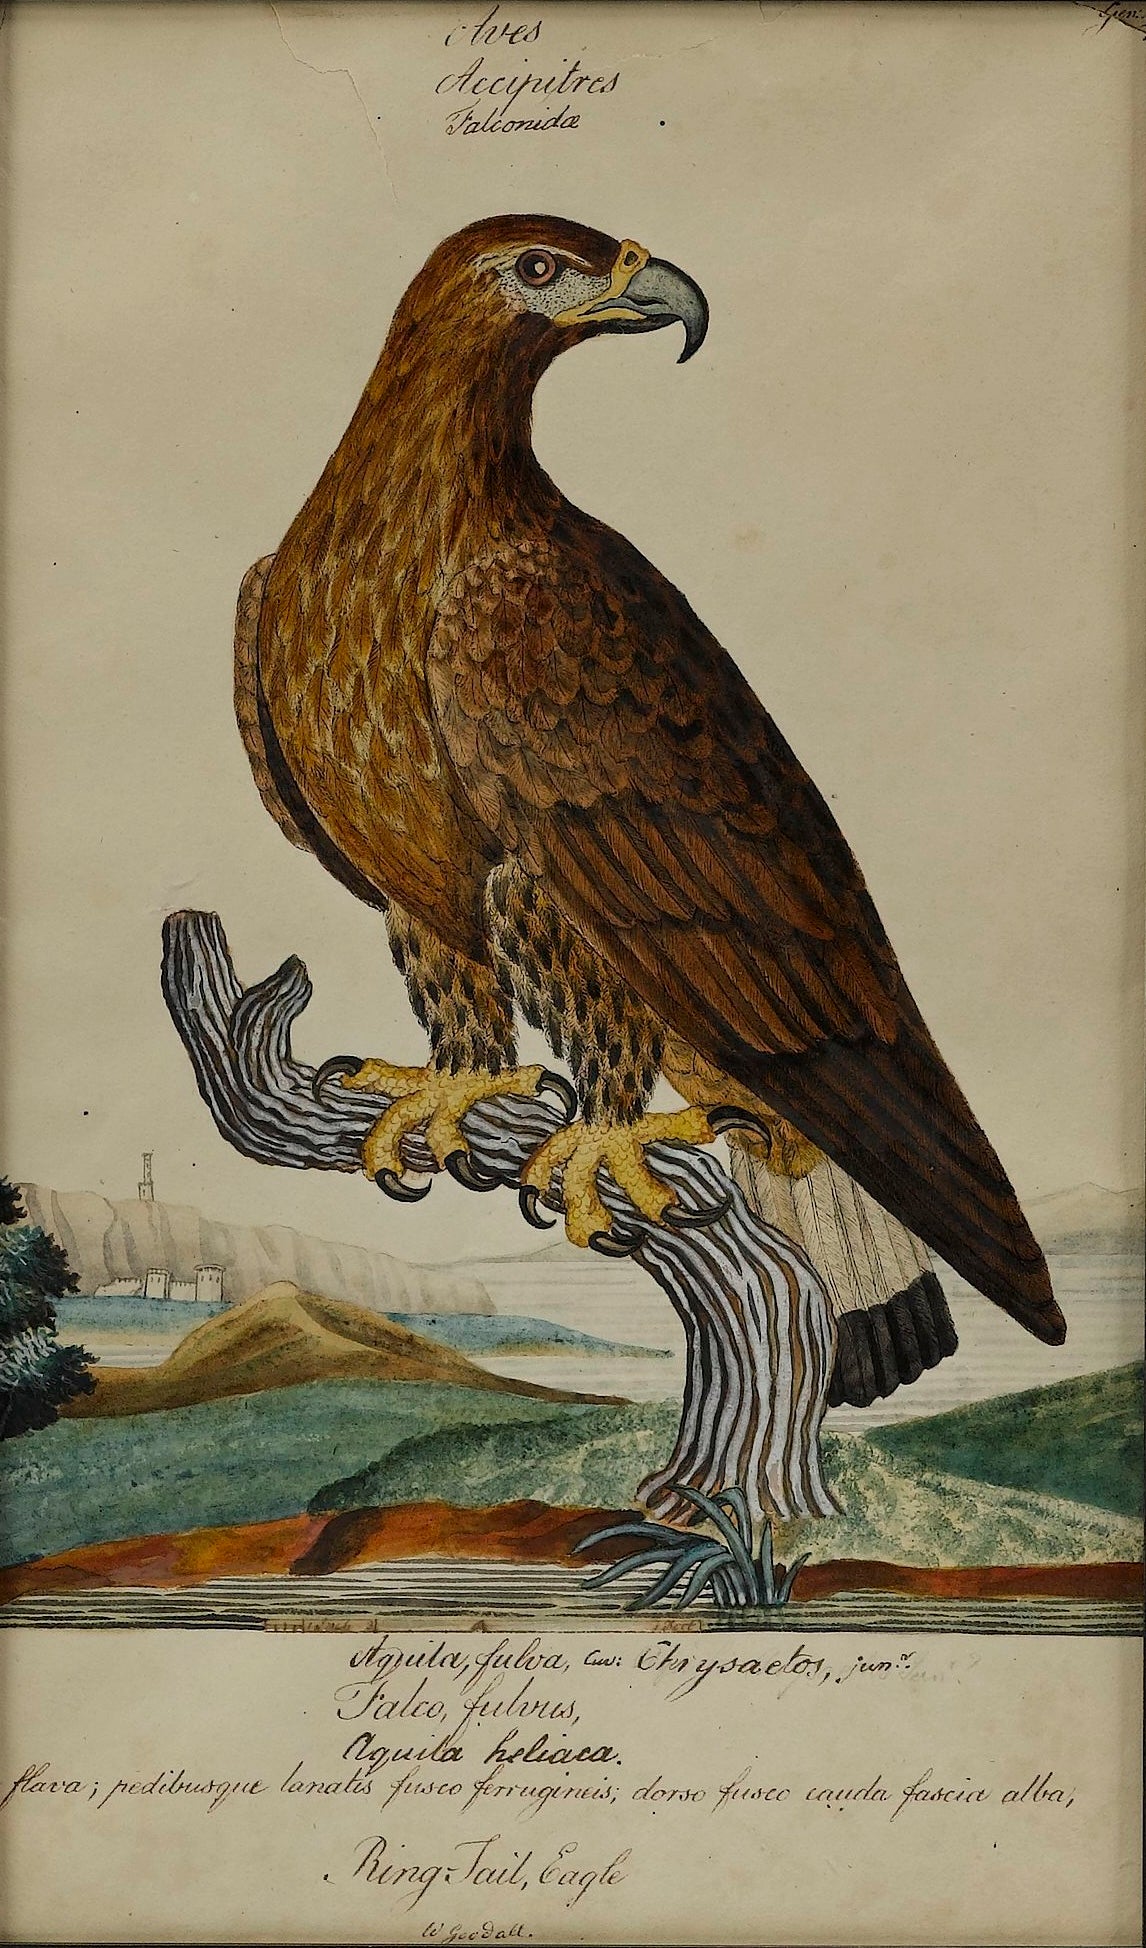 "Ring Tail Eagle" by William Goodall, Watercolor and Ink Drawing, Early 19th Century